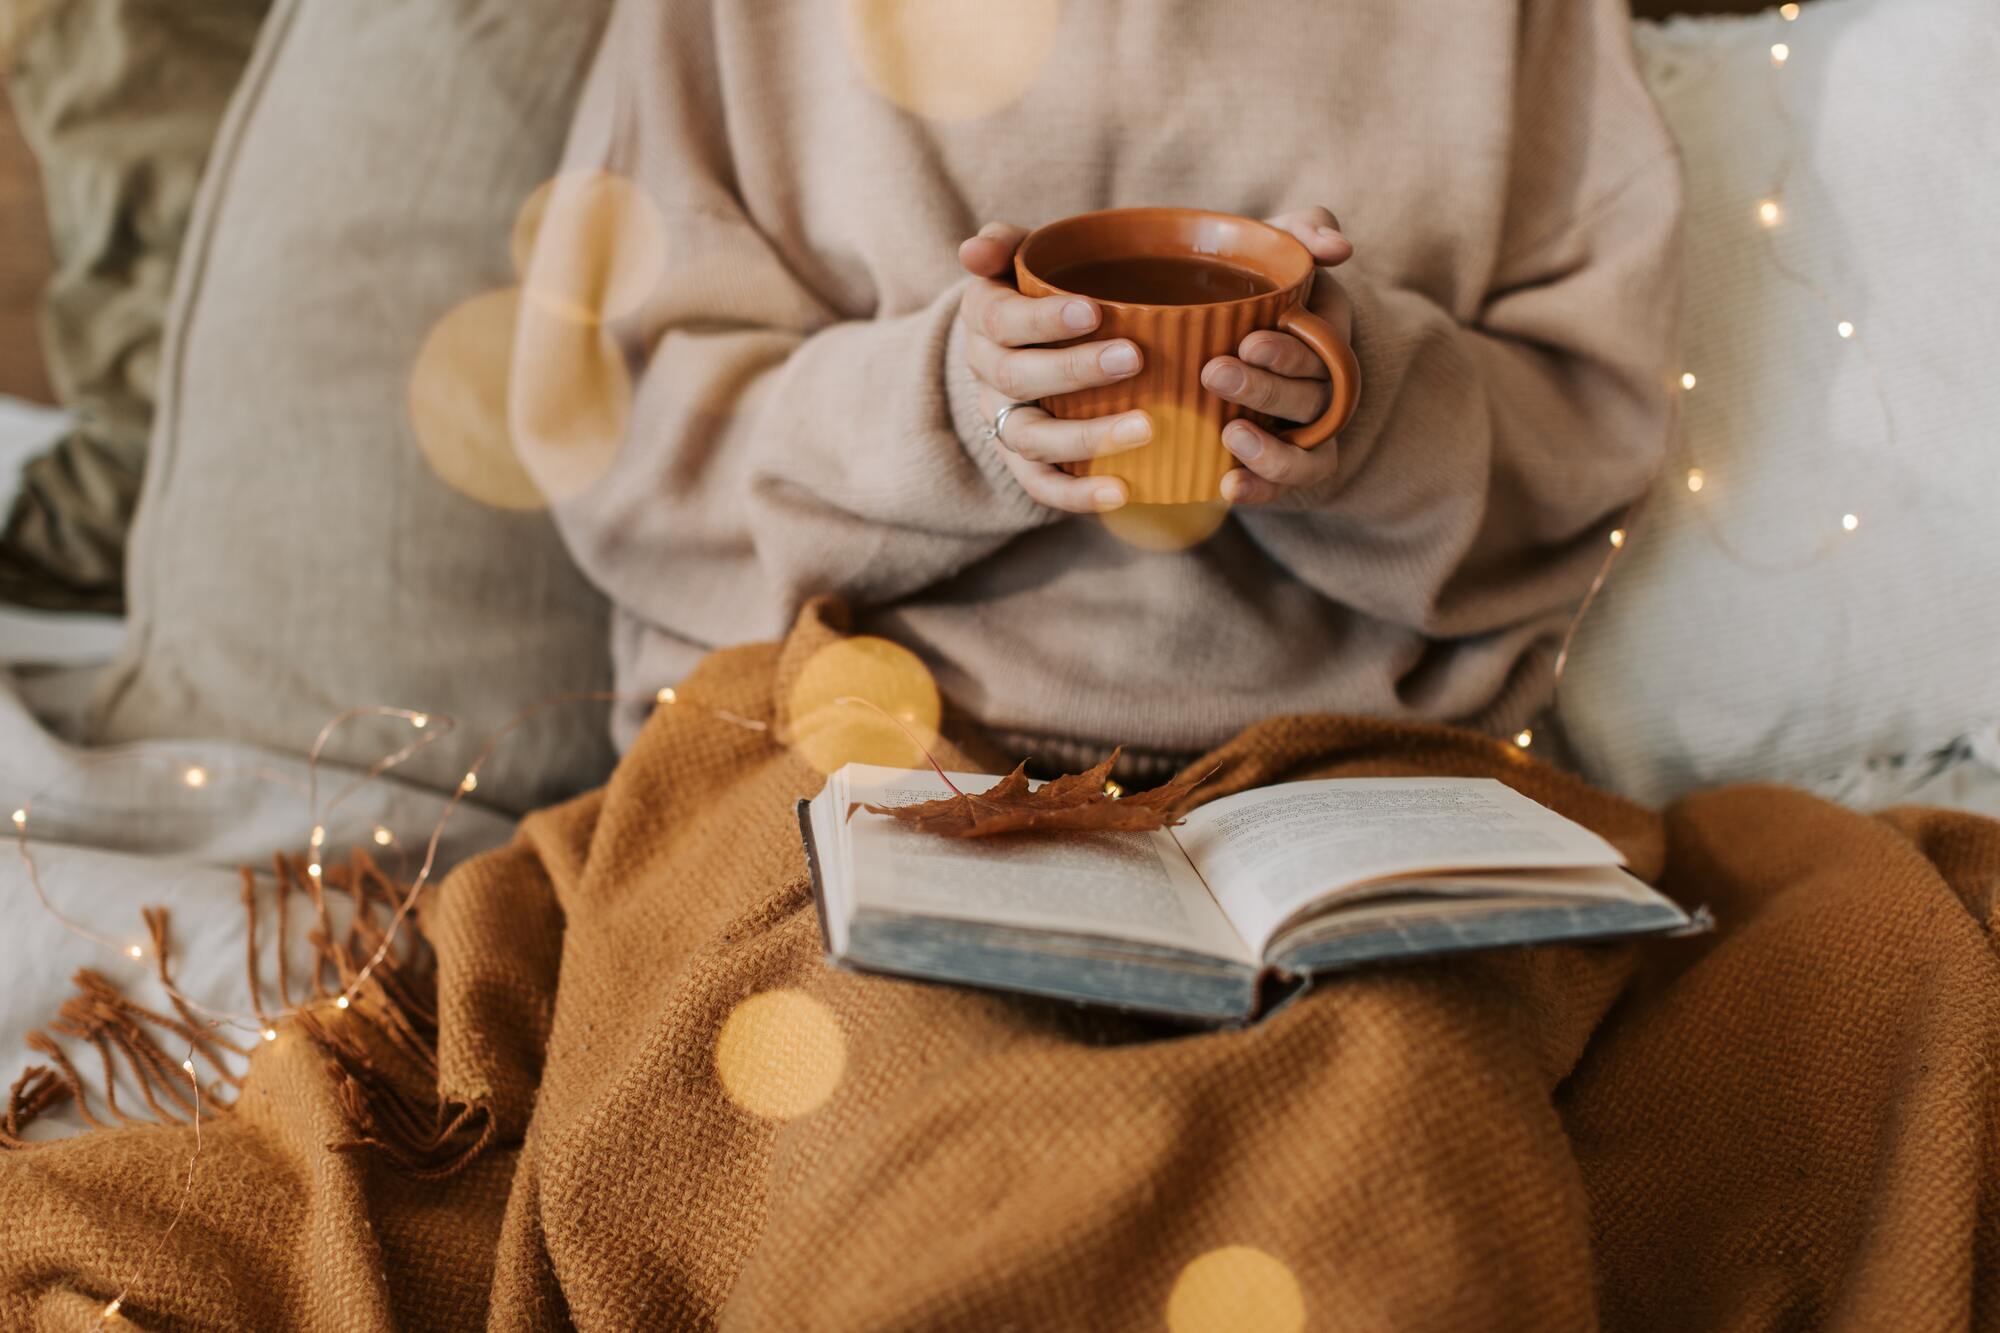 Woman's Hands Holding Mug of Coffee While Reading A Book